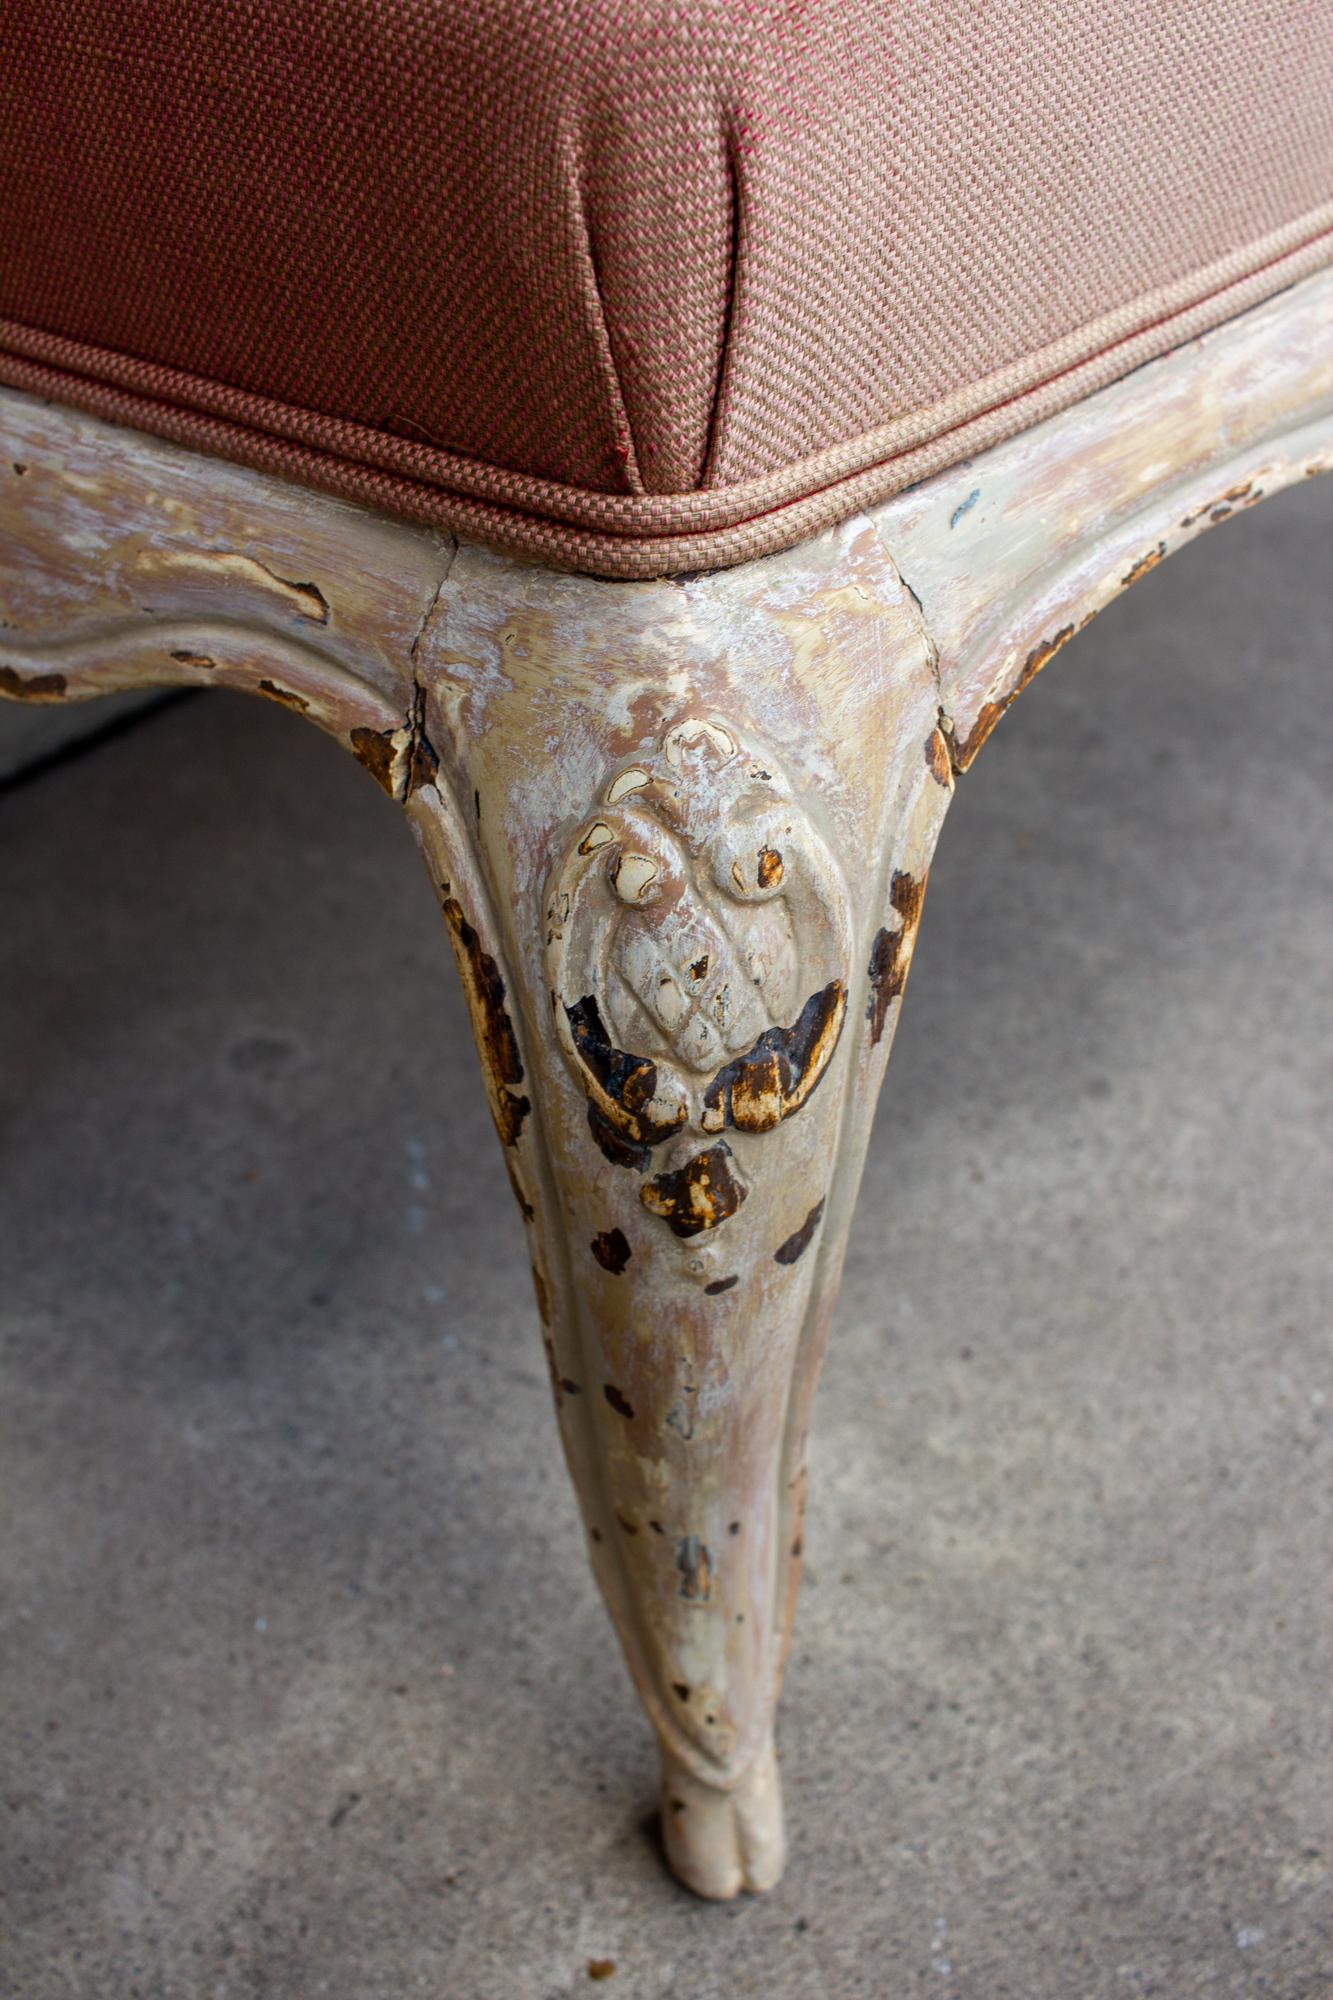 Upholstery Antique French Carved Bench with Distressed Painted Finish, circa 1820